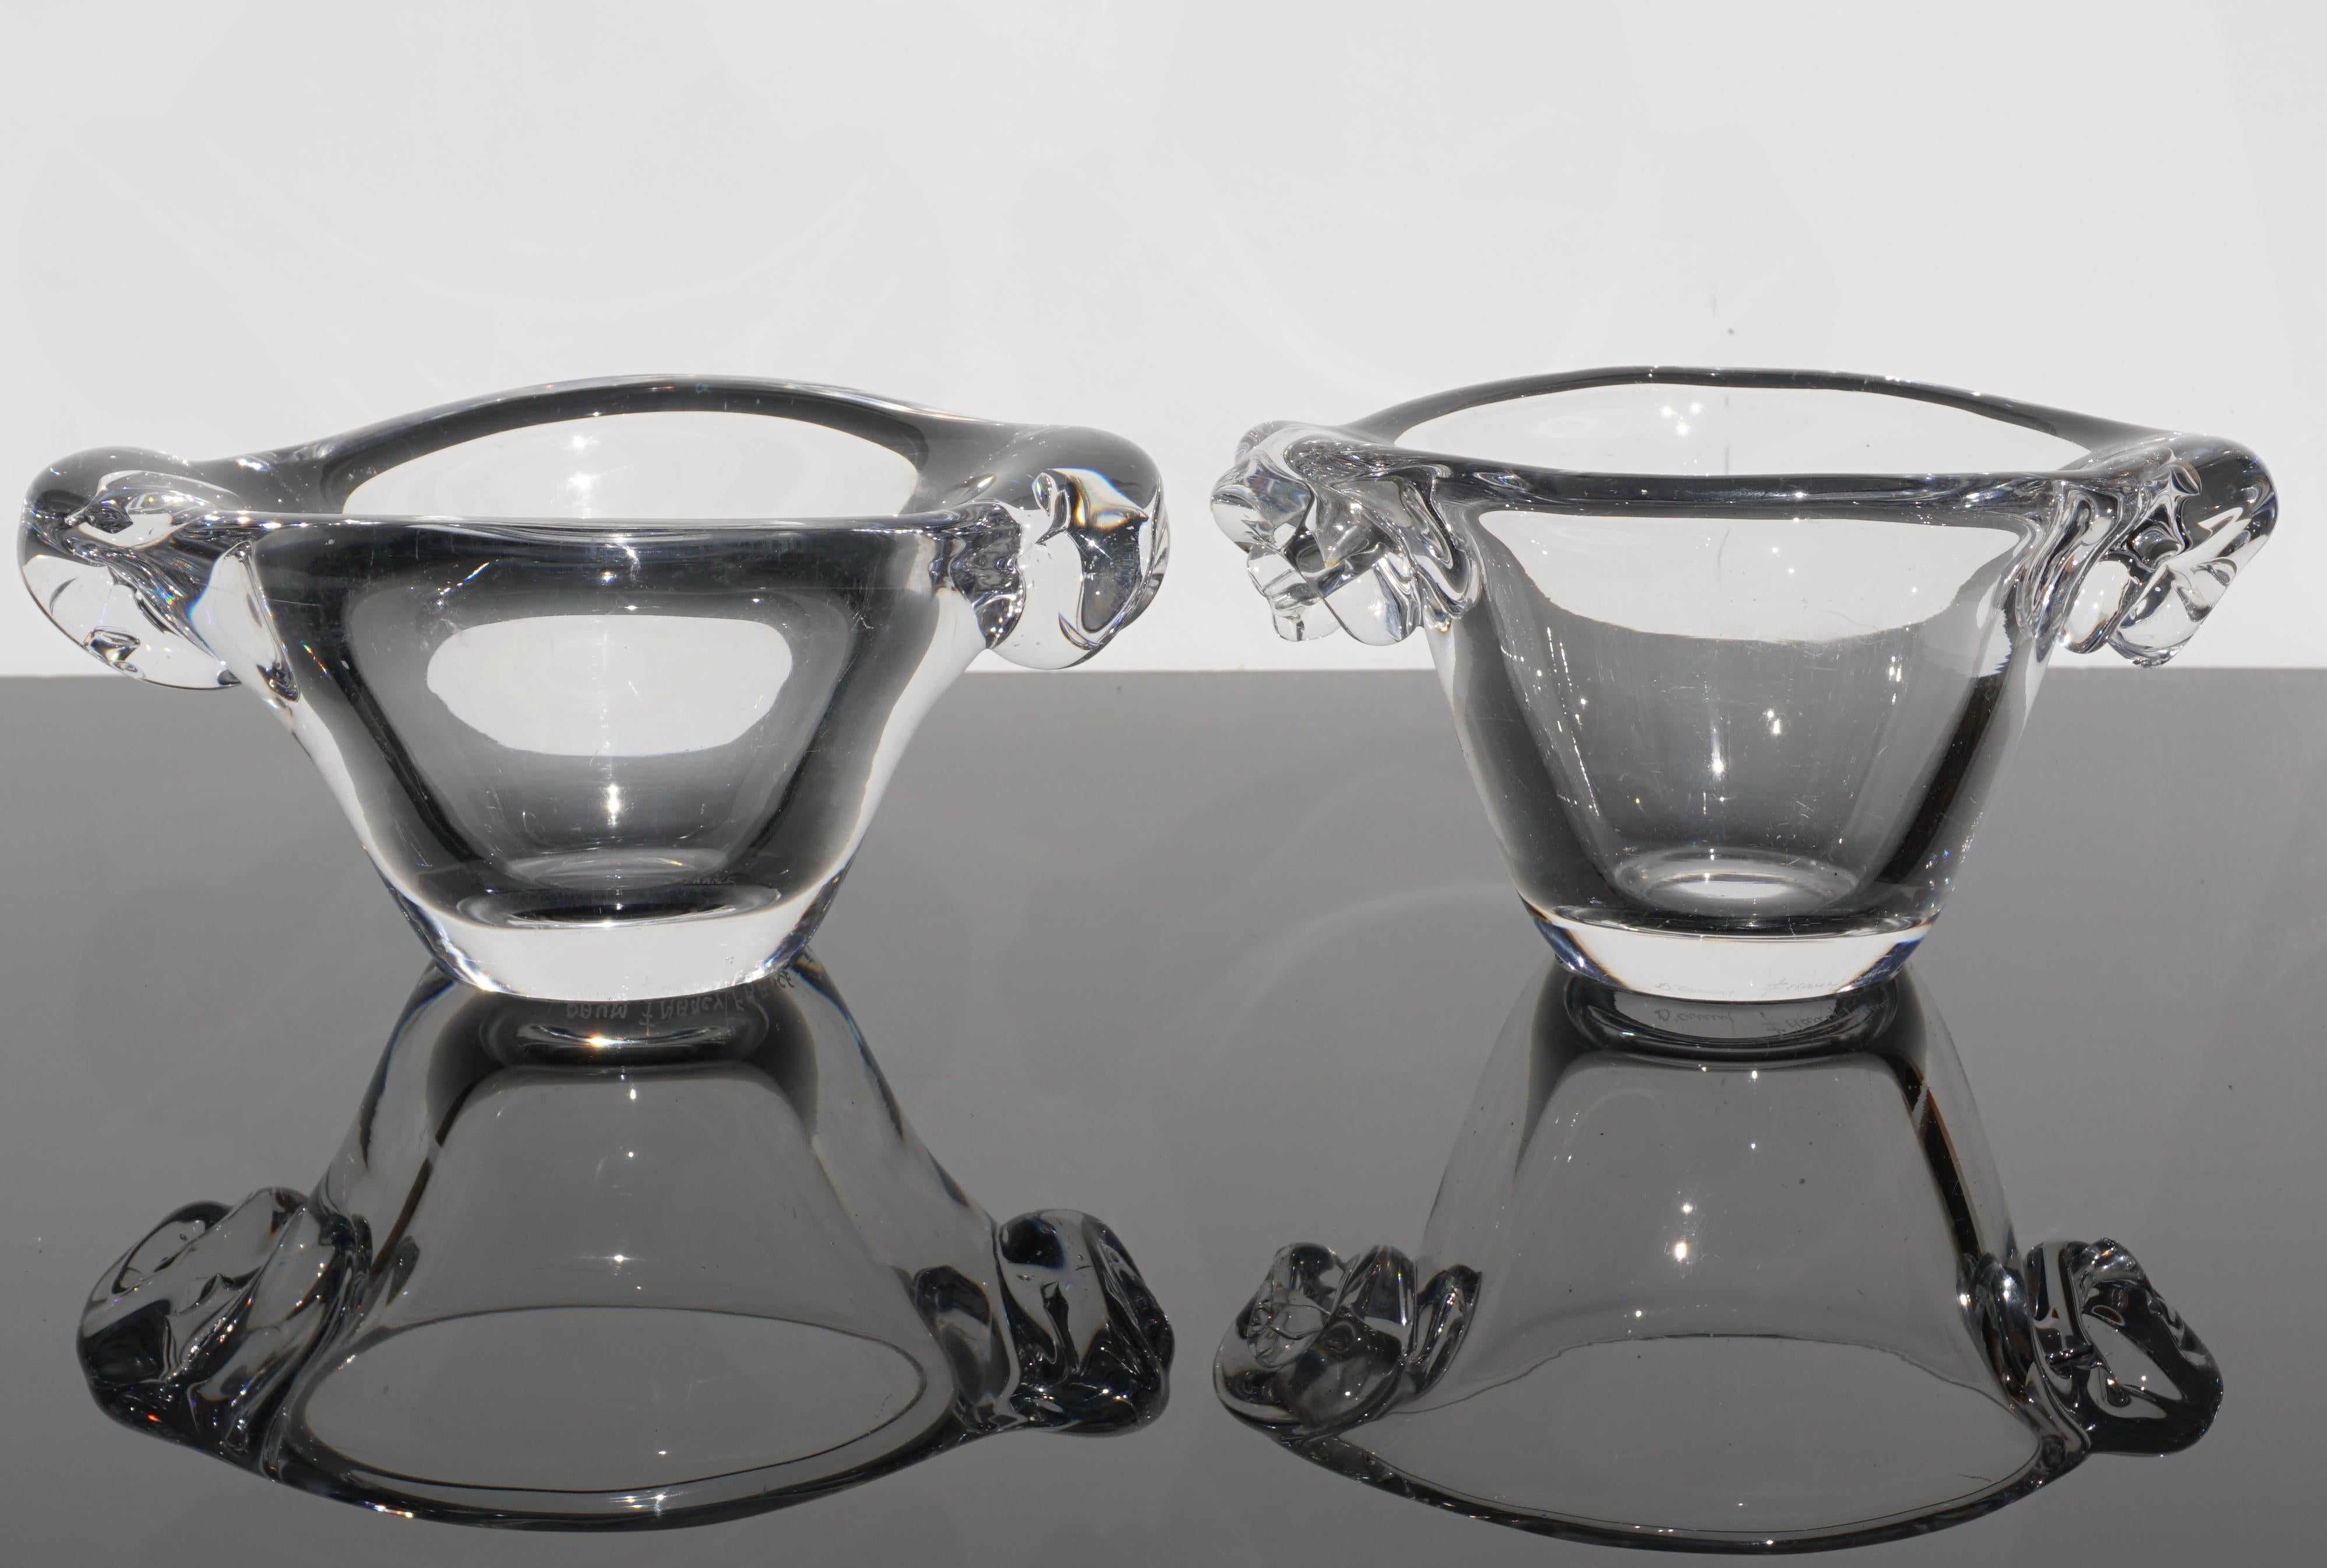 A beautiful pair of distinct thick globular bowls perfect for gatherings or parties to serve nuts or hors d’oeuvres to you r special guests. A true touch of class!

Both etched: Lalique France

Measures: Width +- 7 inches
Height 4 inches

Condition: